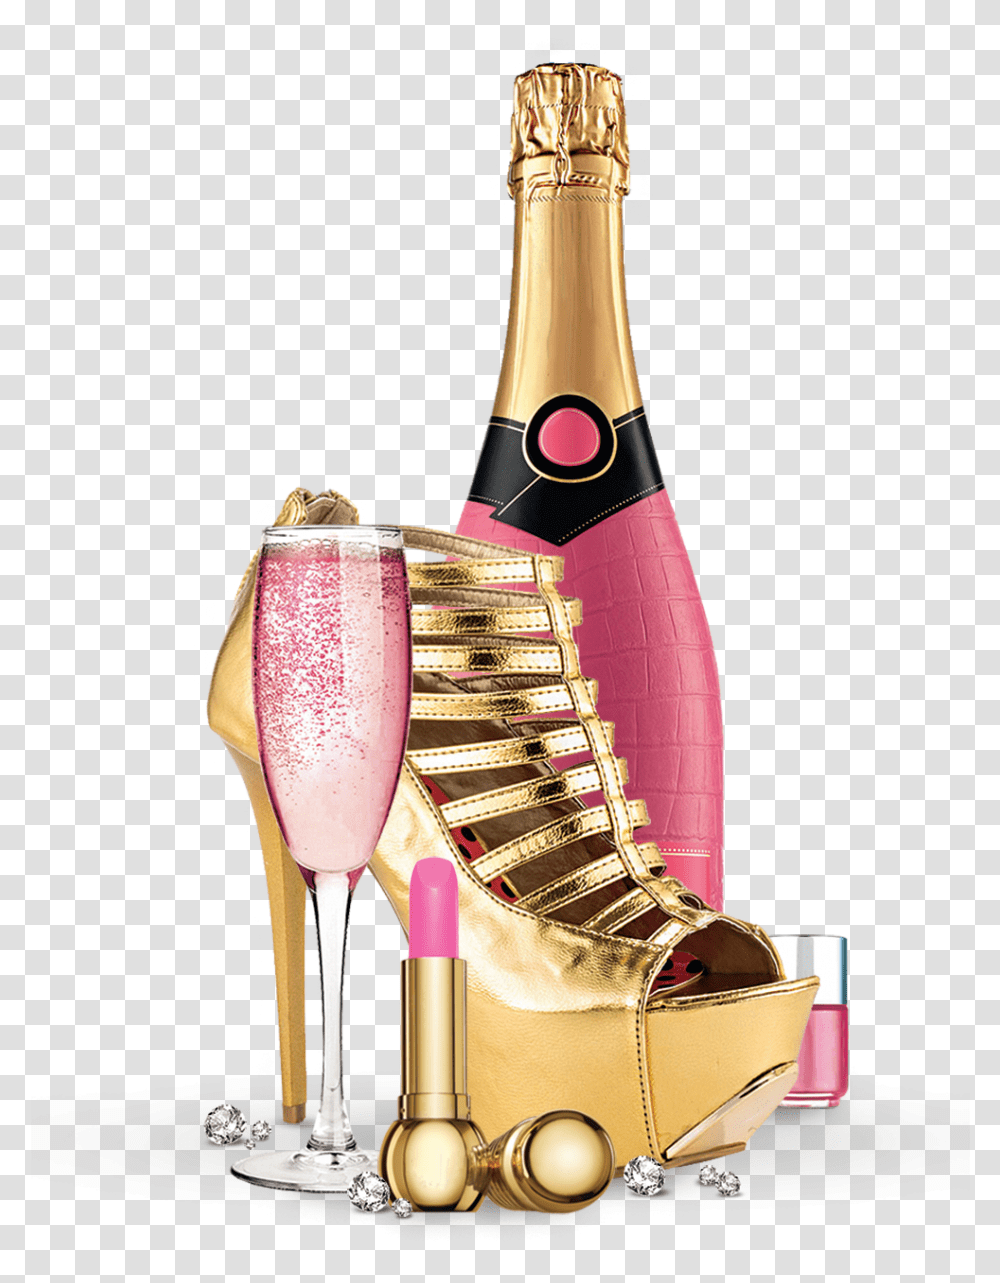 Champagne Cup Download Hd Clipart Pink Champagne Bottles, Wine, Alcohol, Beverage Transparent Png